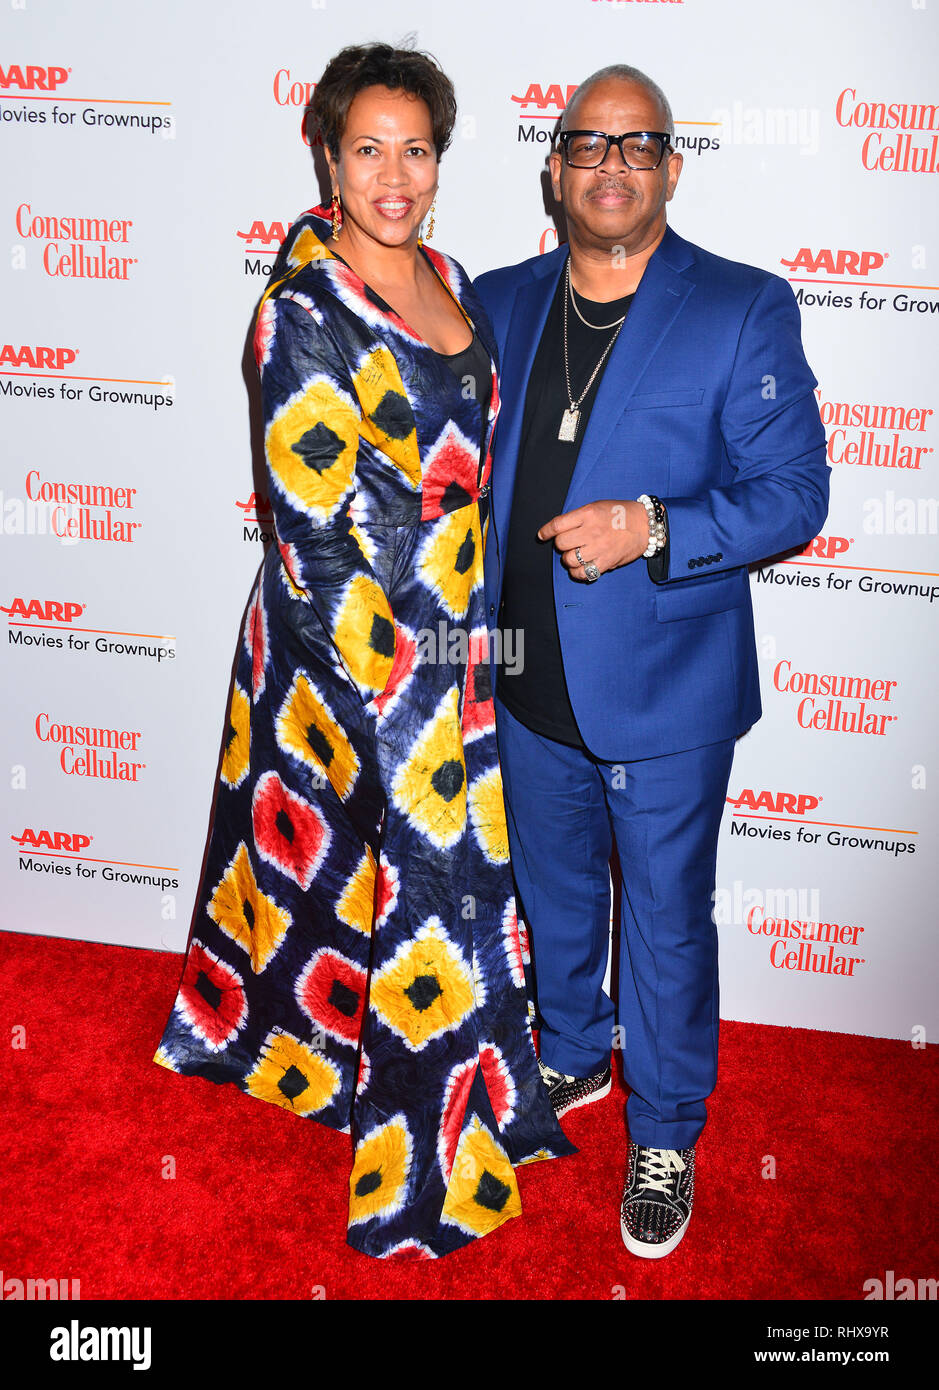 Los Angeles, USA. 04th Feb, 2019. Terence Blanchard and wife Robin Burgess 030 attends the 18th Annual AARP The Magazine's Movies For Grownups Awards at the Beverly Wilshire Four Seasons Hotel on February 04, 2019 in Beverly Hills, California. Credit: Tsuni/USA/Alamy Live News Stock Photo